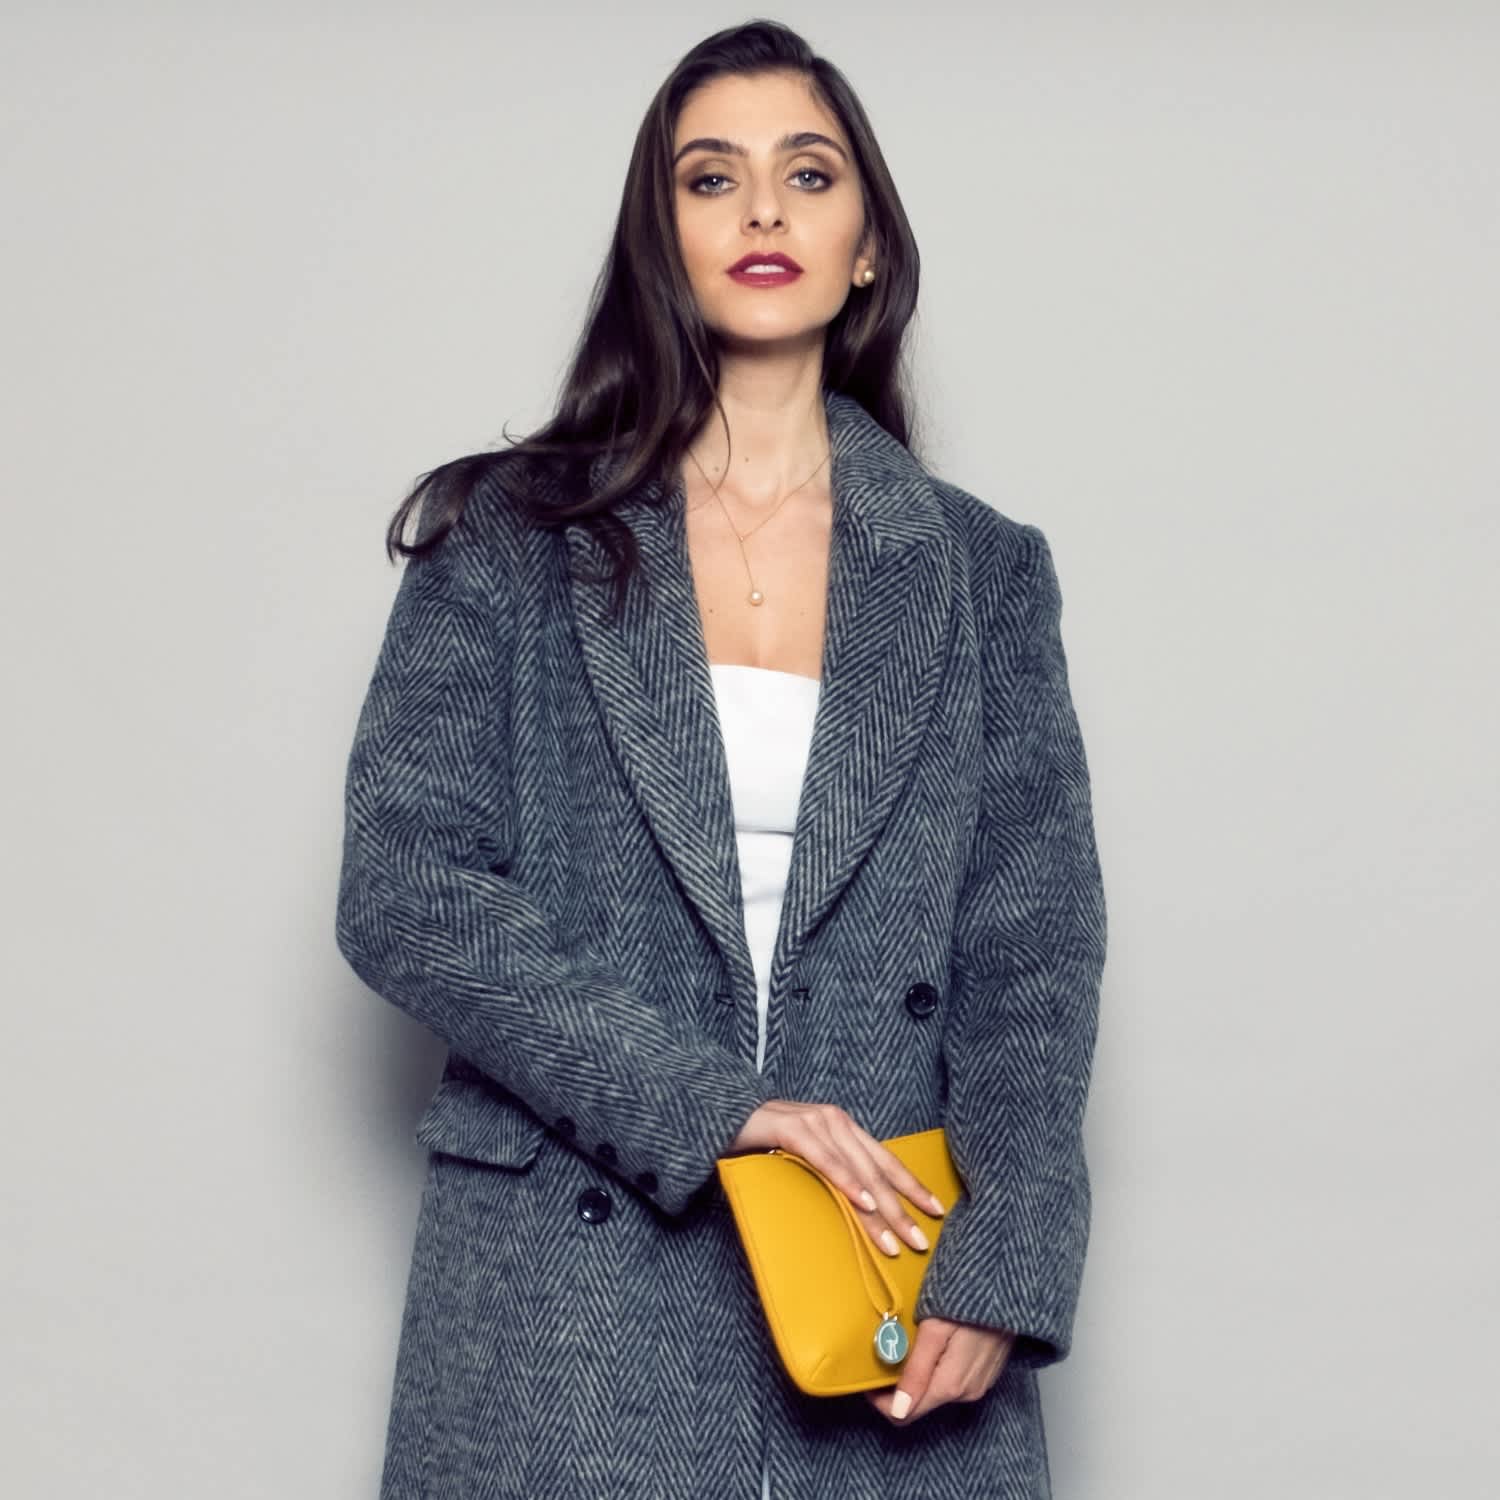 The Morphbag by GSK Vegan Leather Multi-Function Clutch In Mustard